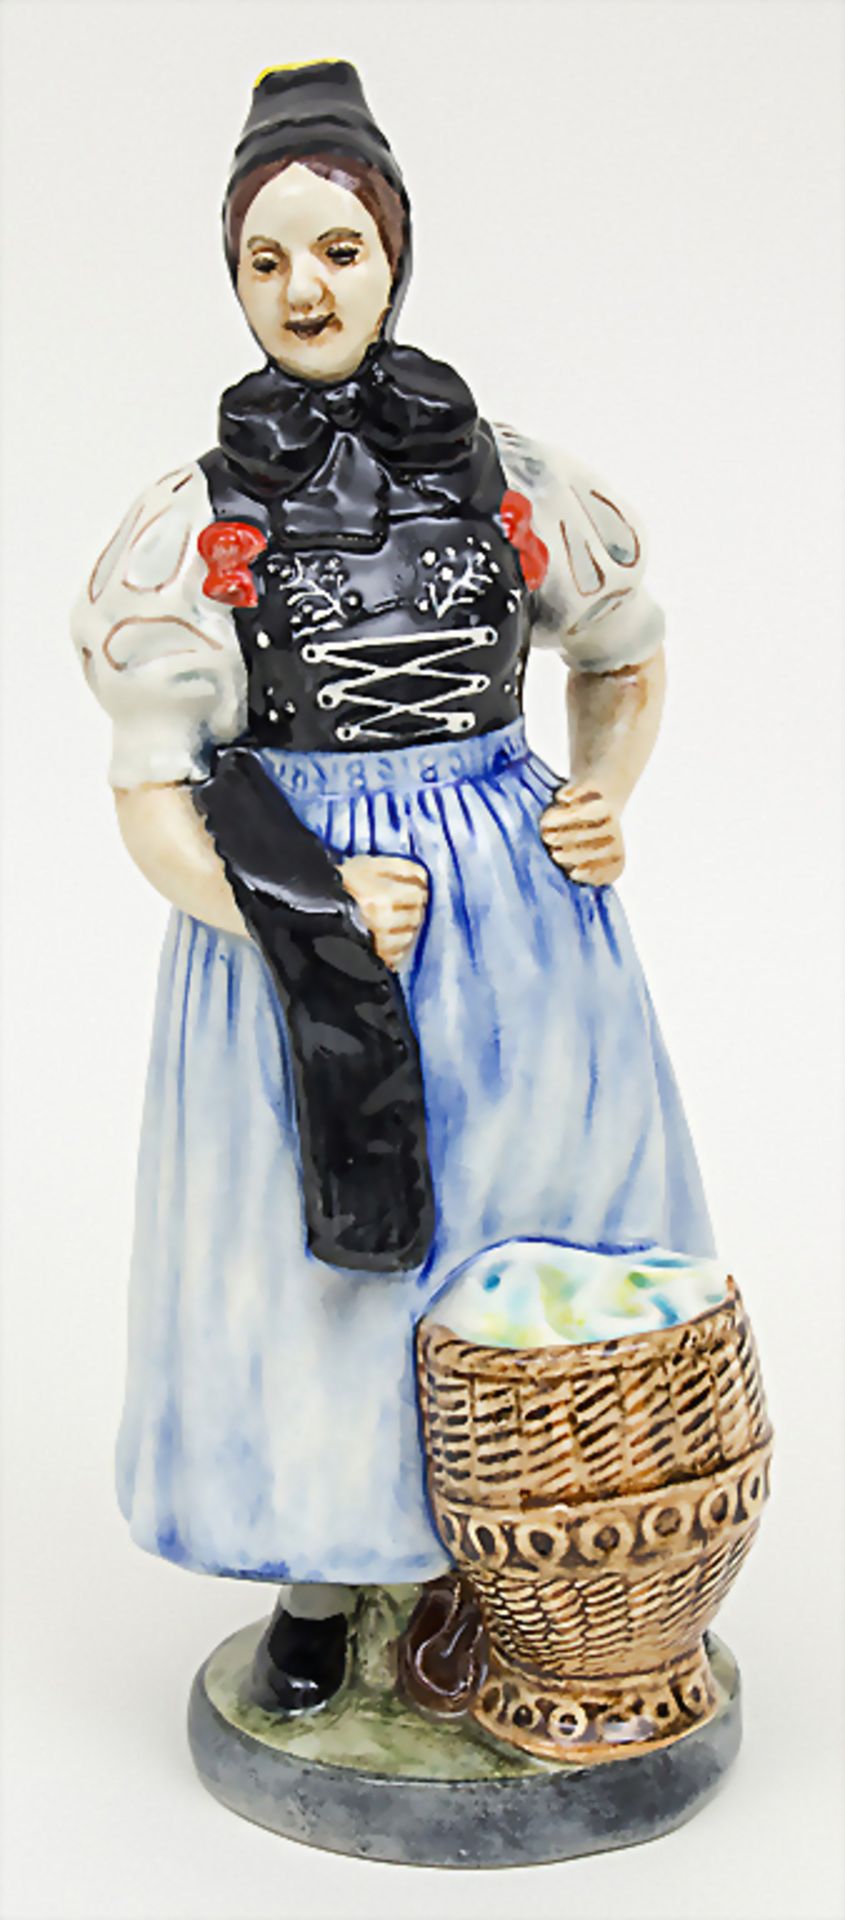 Trachtenfigur 'Tribergerin' / A costumed woman from the Black Forest, Karlsruher Majolika, um 19